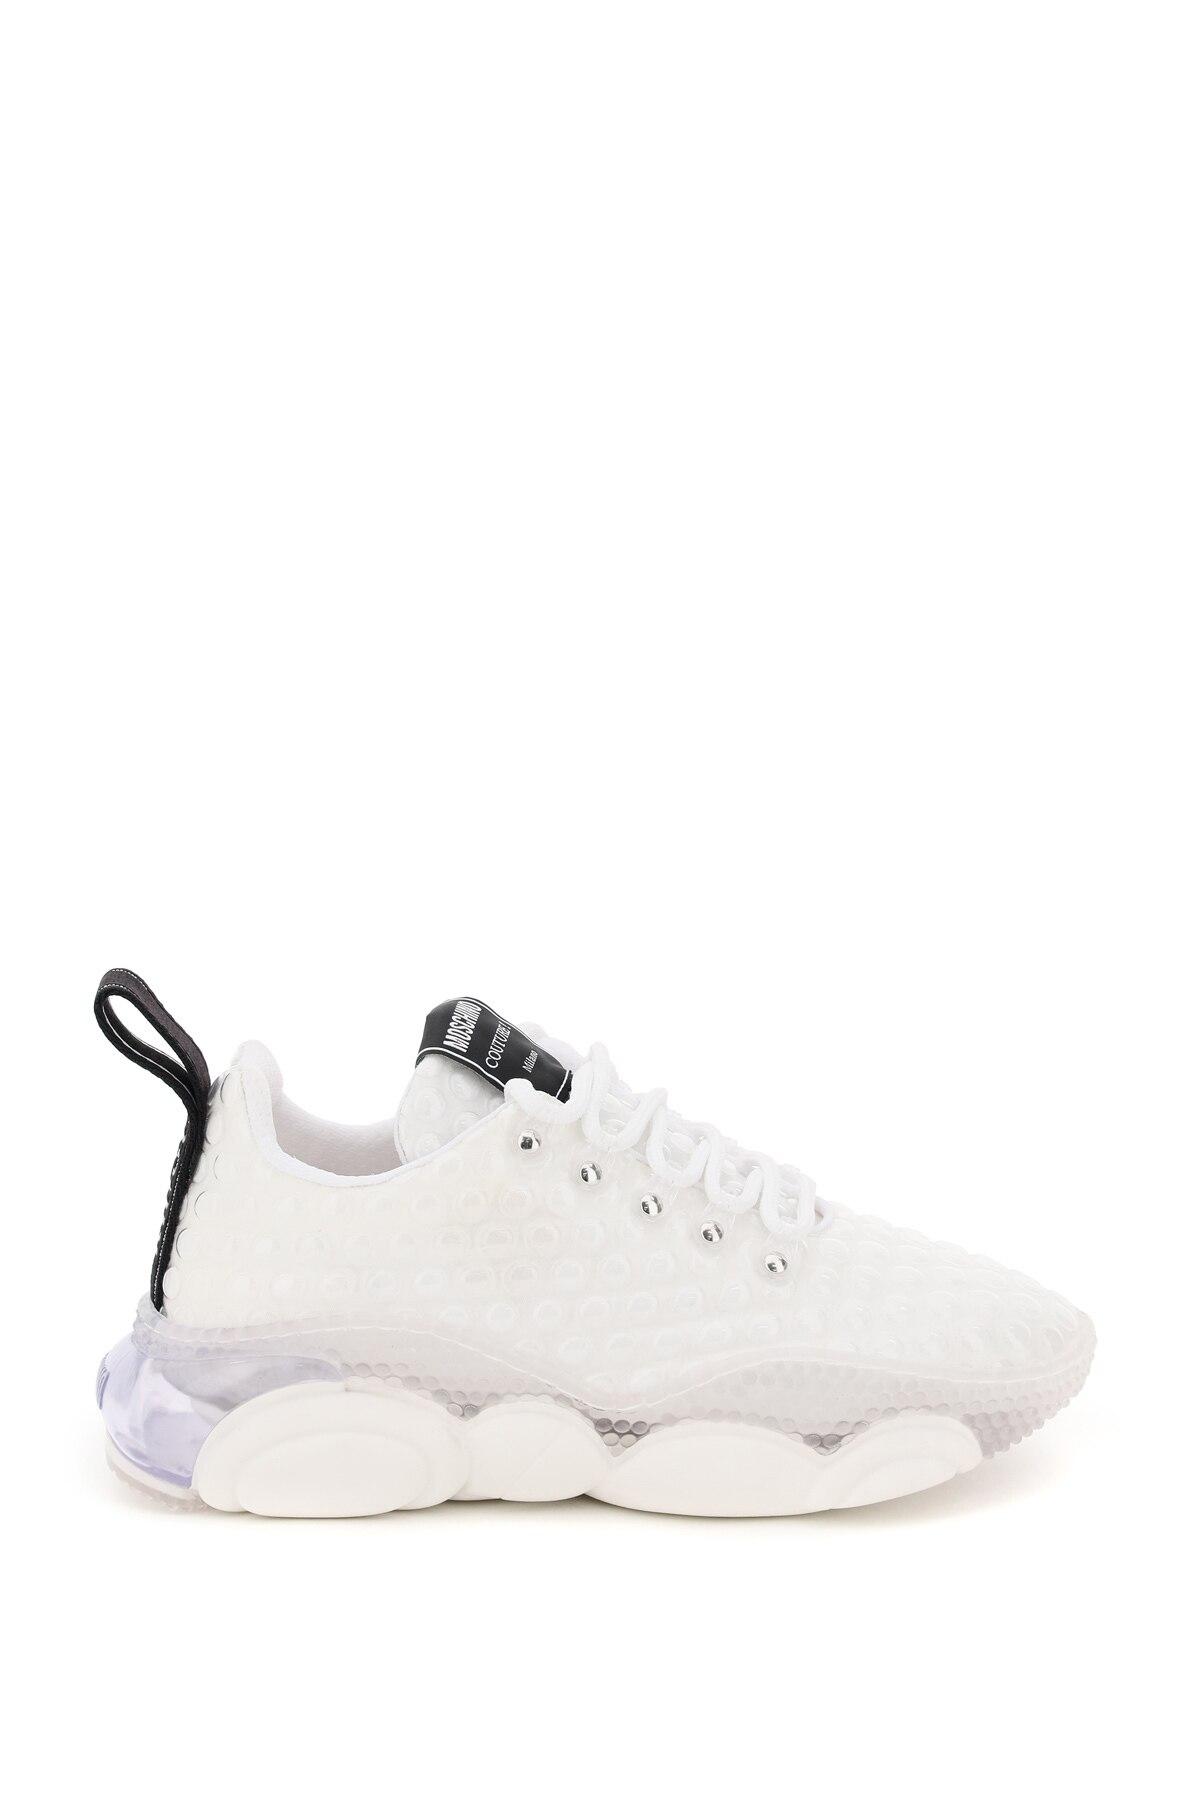 Moschino Rubber Teddy Double Bubble Sneakers in White | Lyst